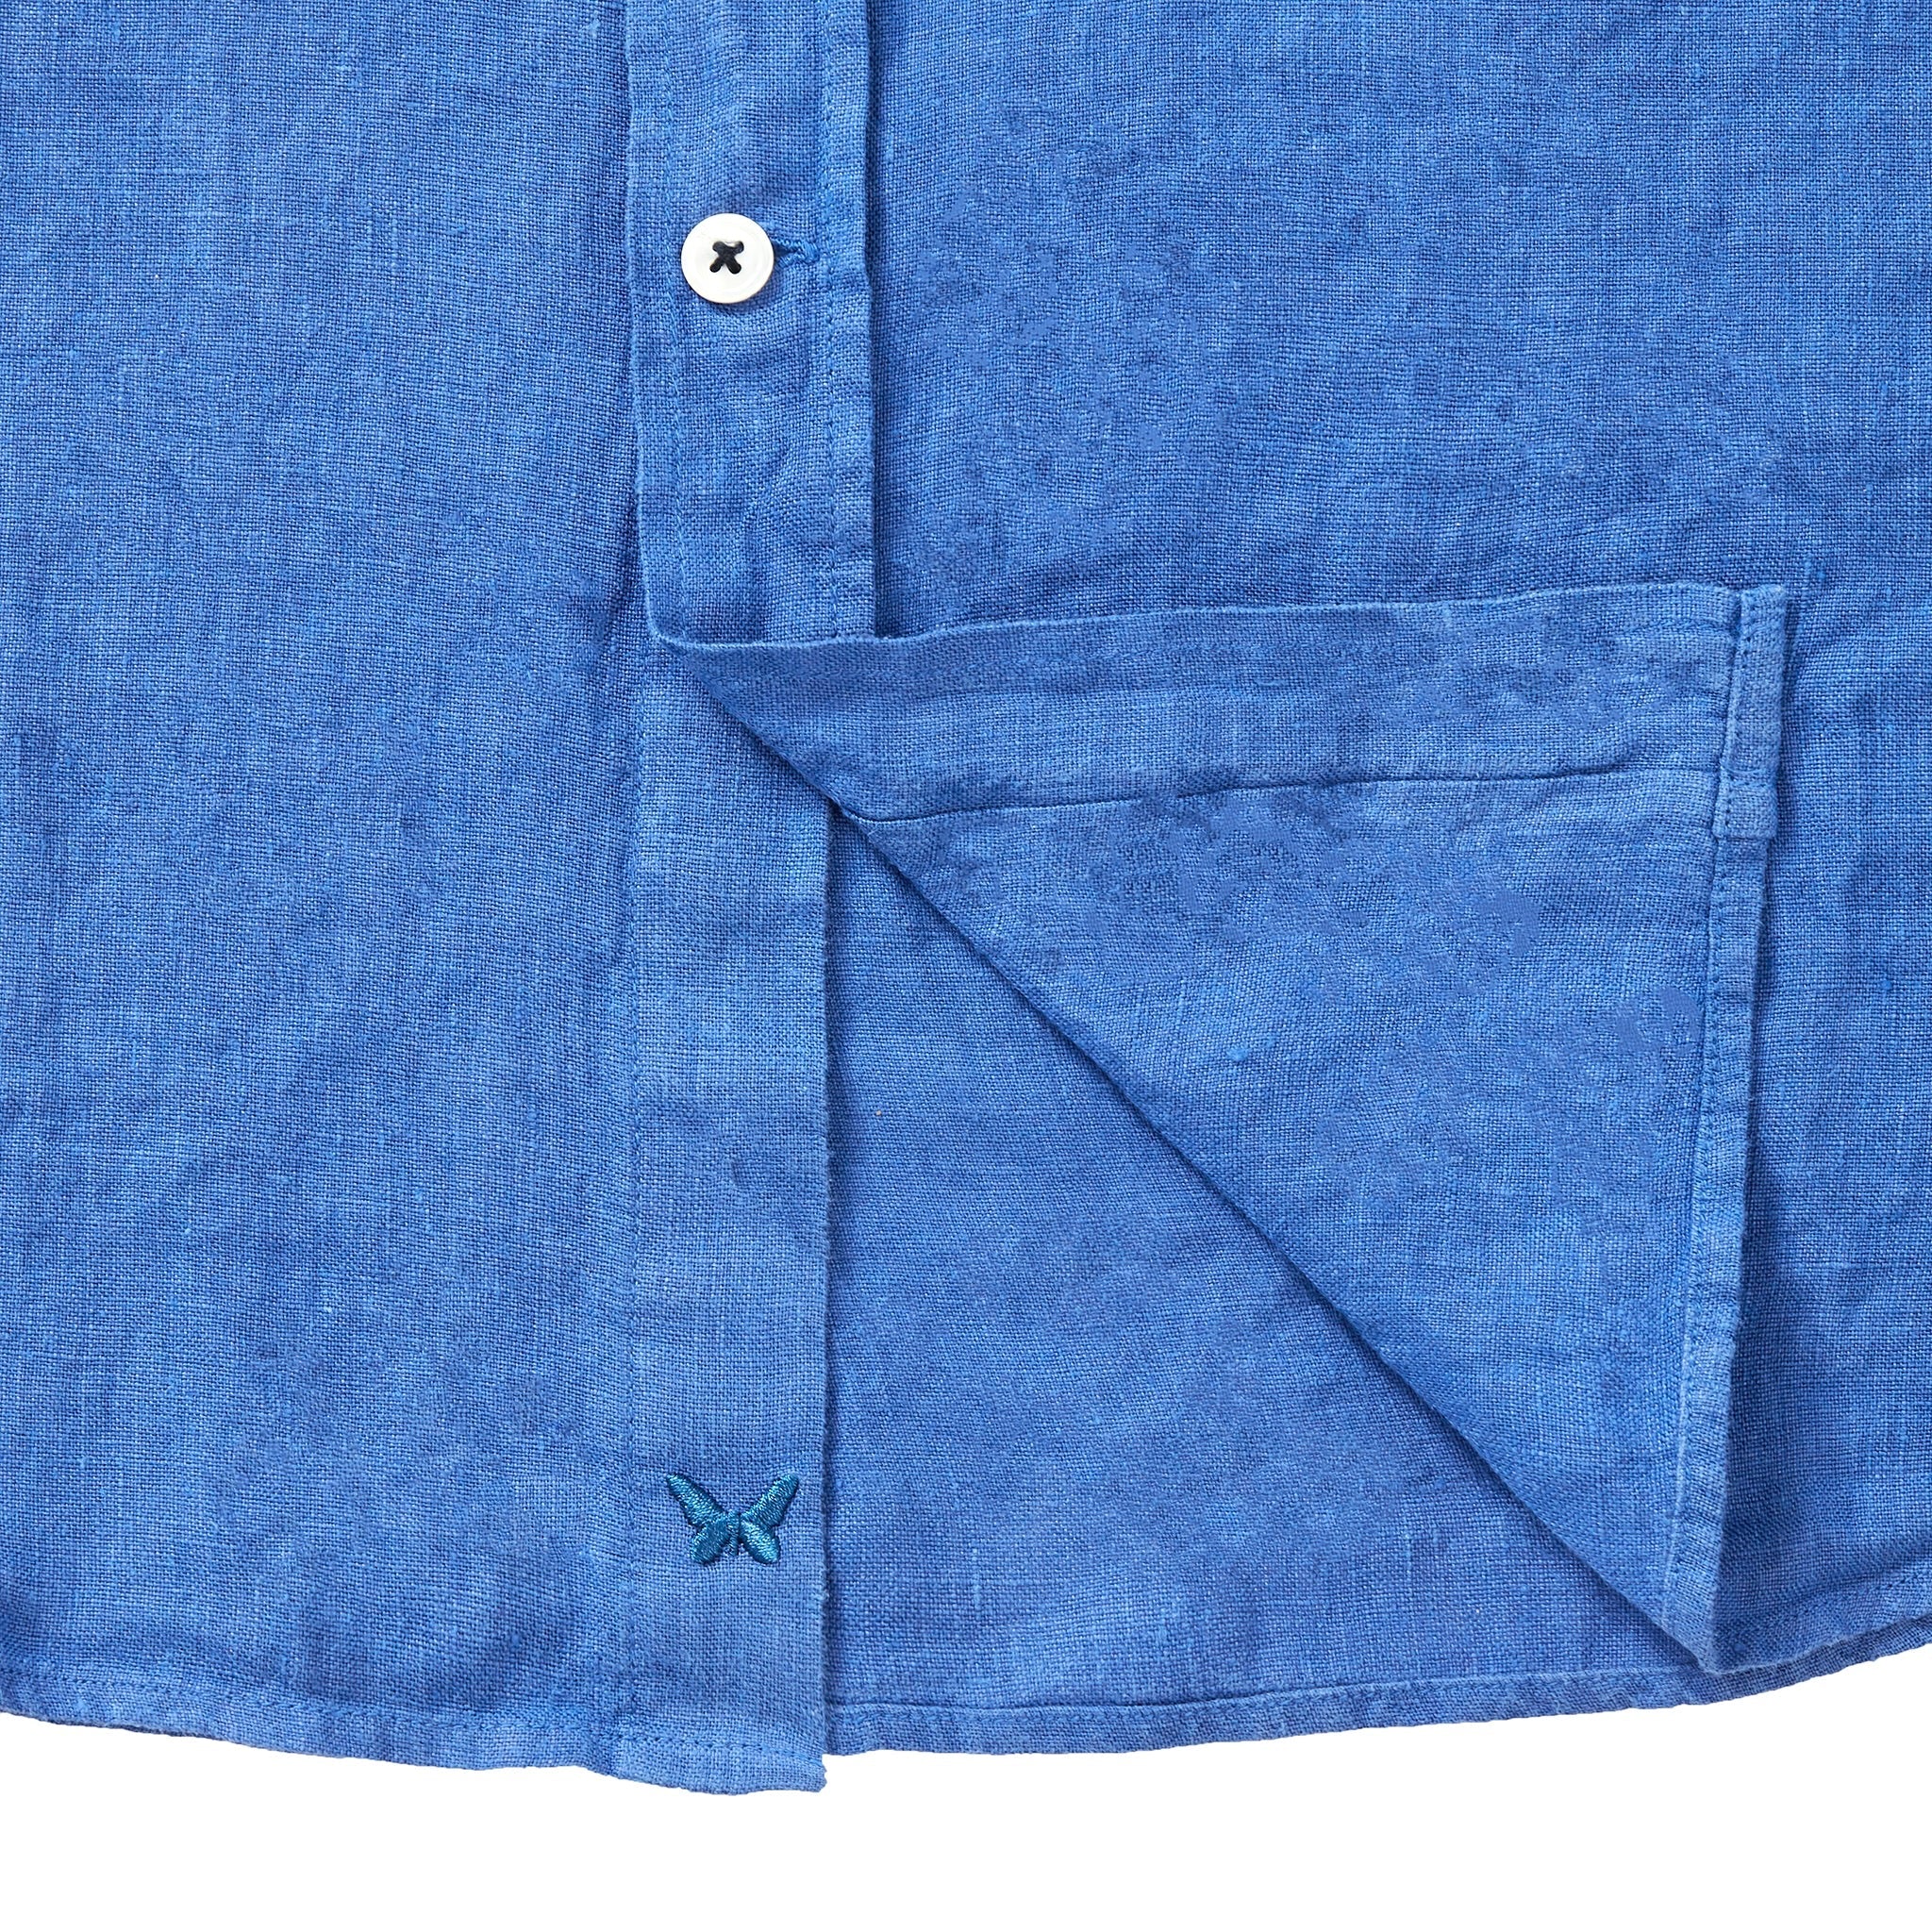 Fitz & Fro 100% Linen Collarless Shirt - ‘The Miles’ Blue